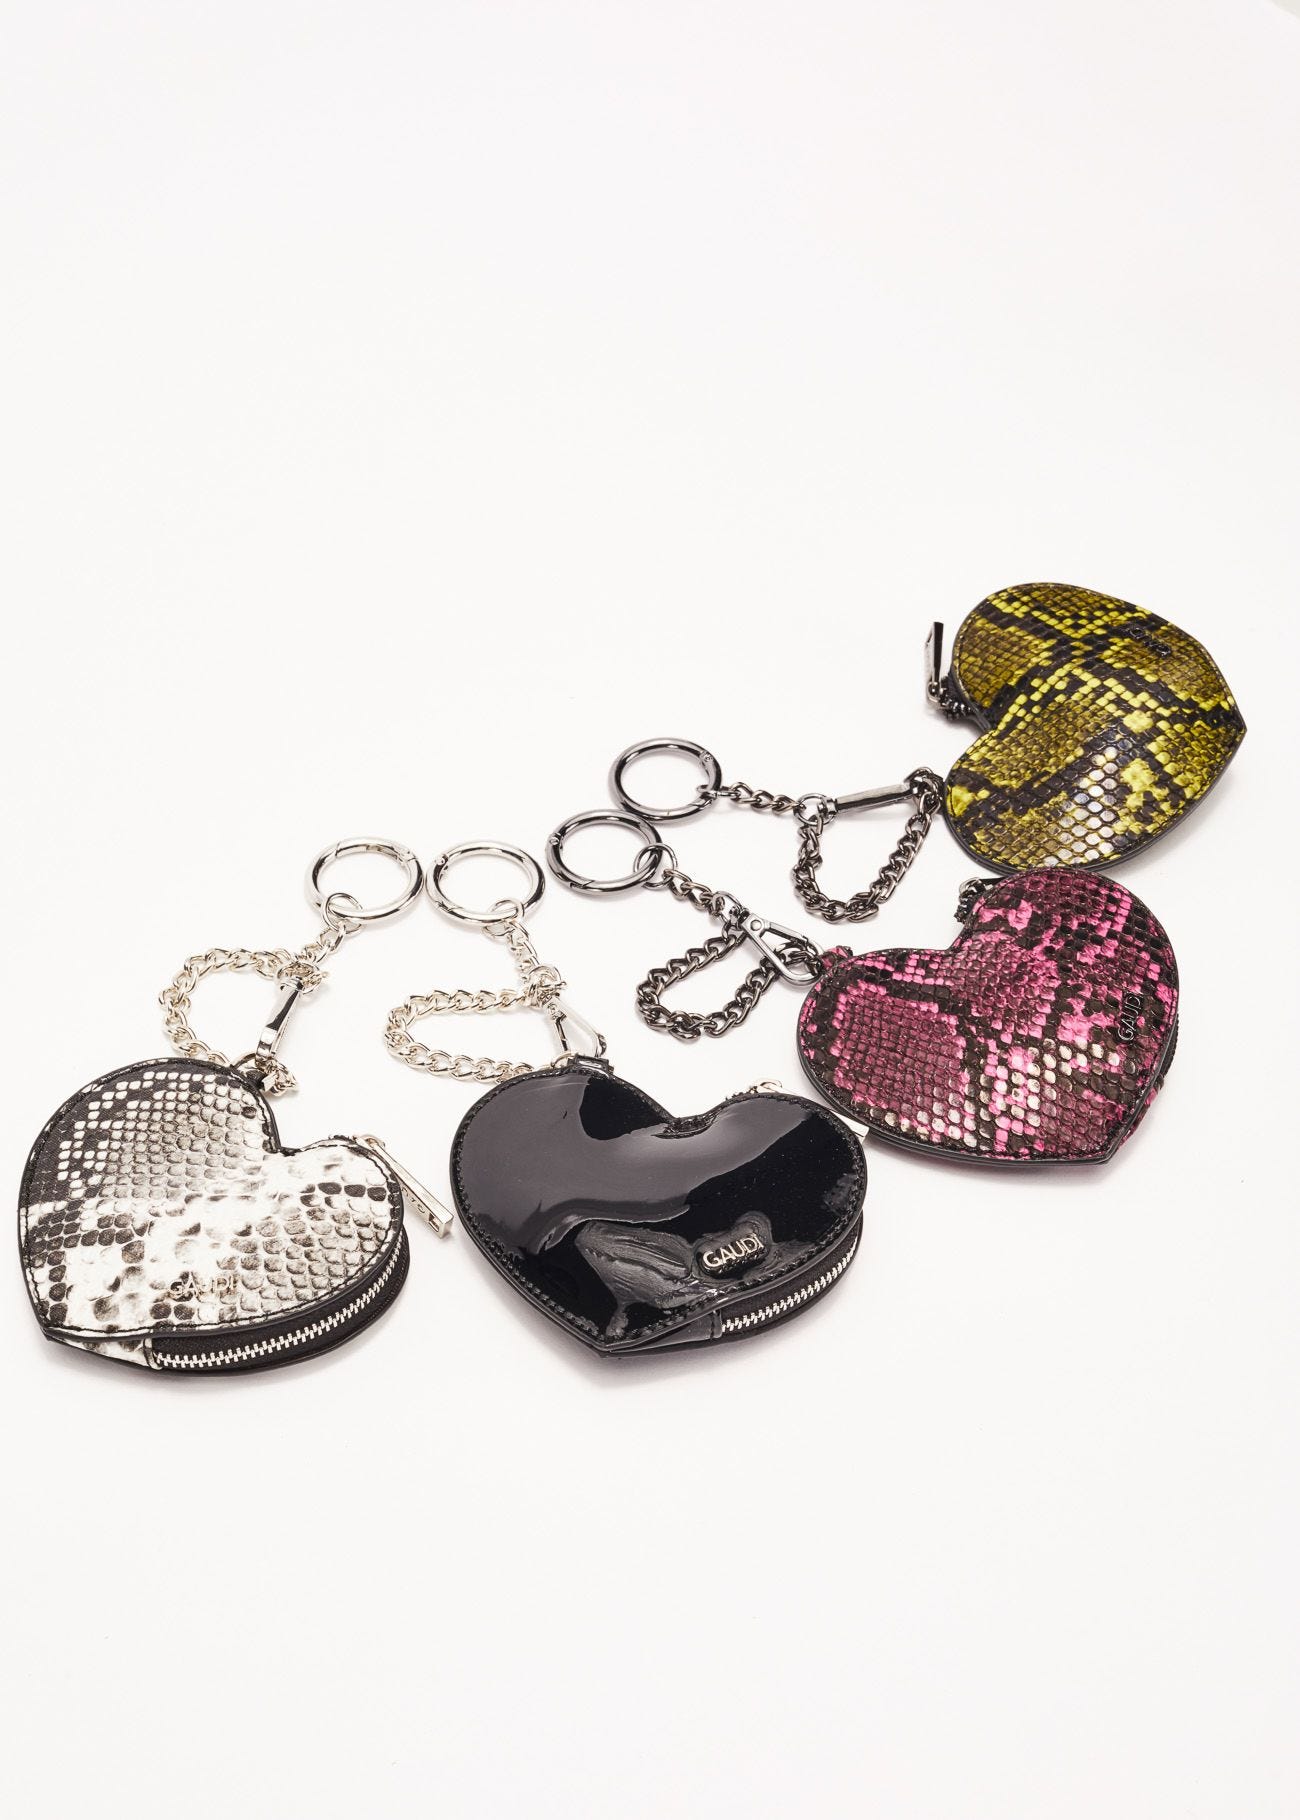 Heart-shaped coin holder